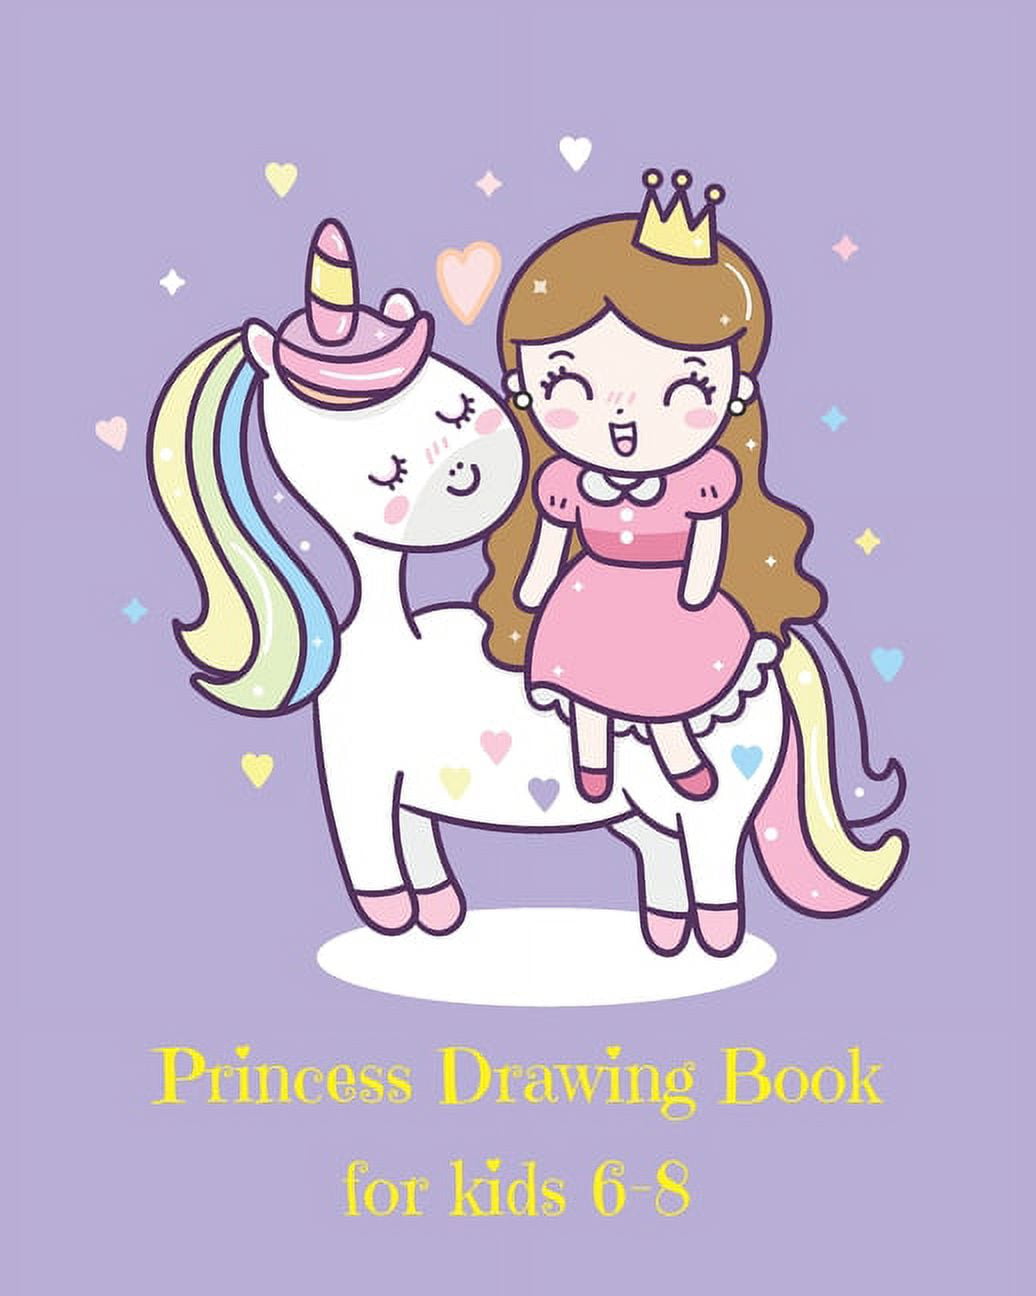 Princess Drawing Book for Kids 6-8: Fantasy Princess and Unicorn Blank Drawing Book for Kids: A Fun Kid Workbook For Creativity, Coloring and Sketching